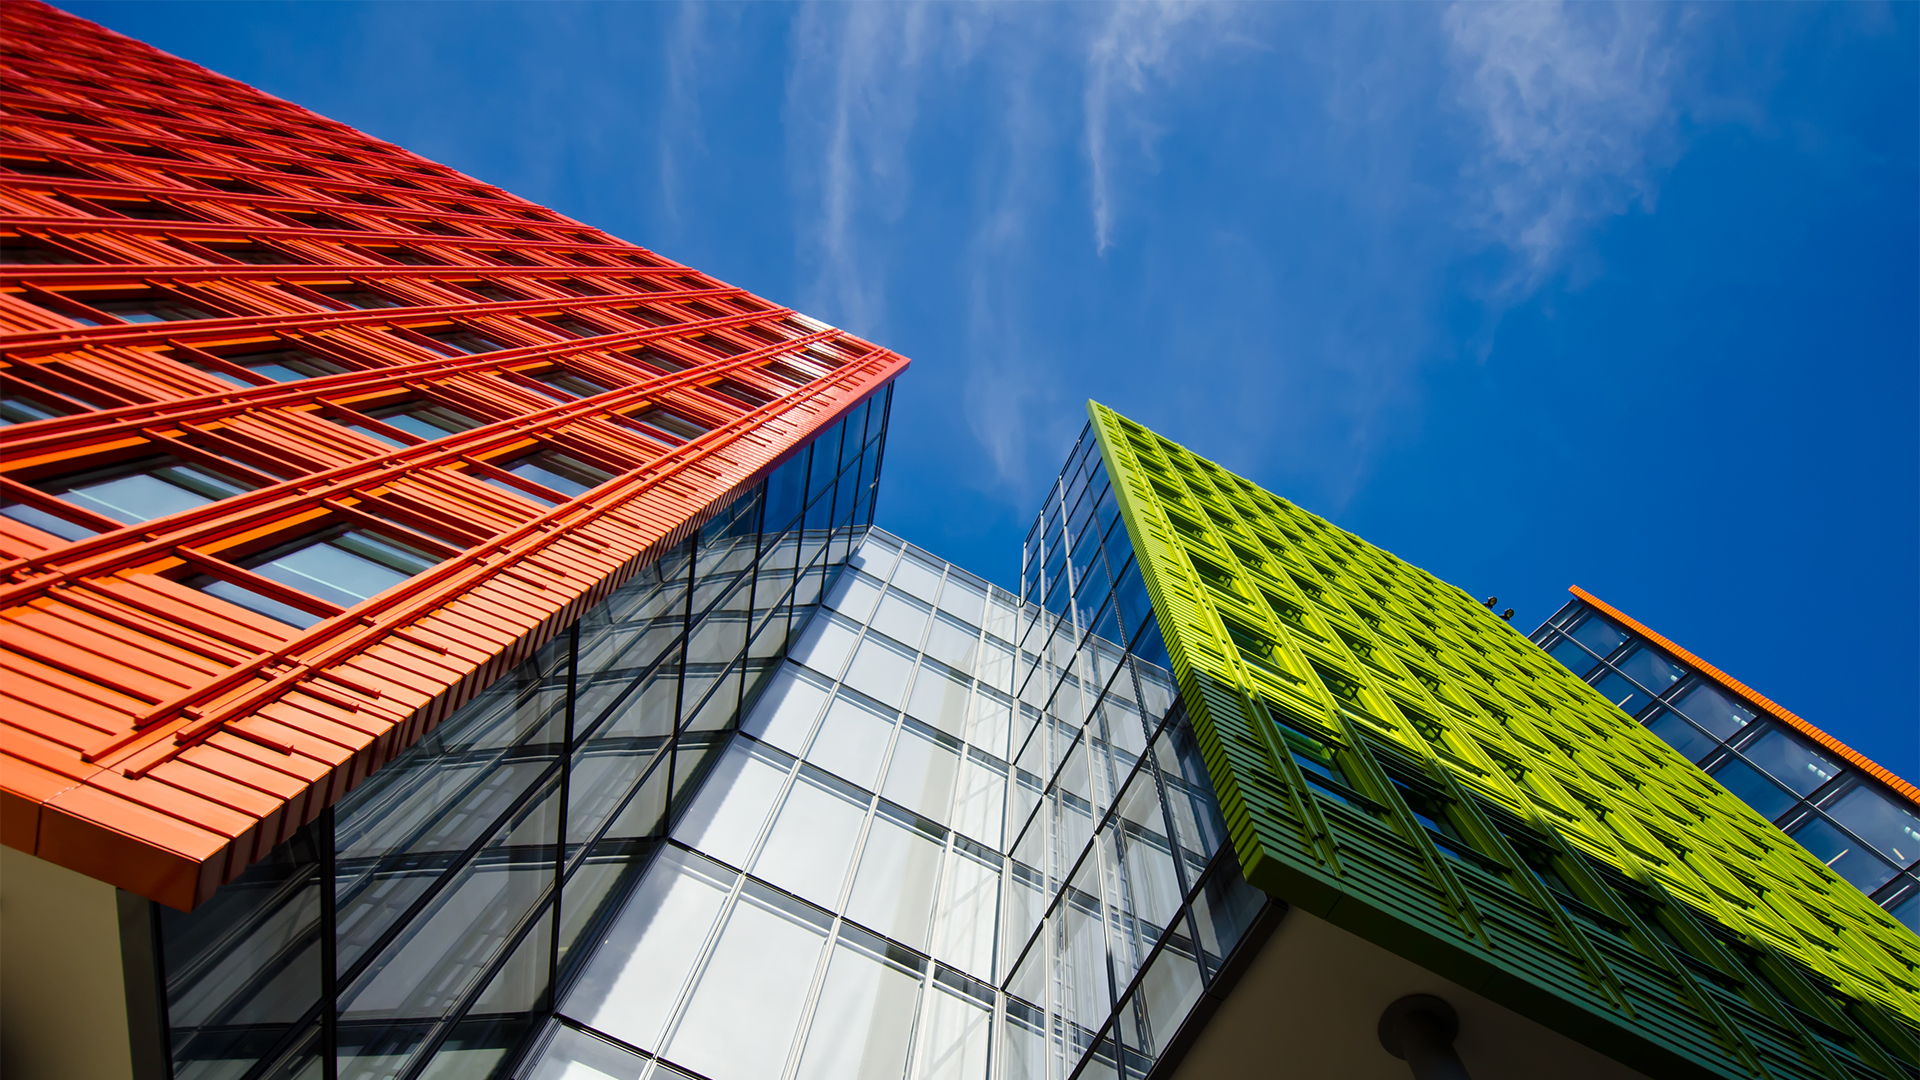 Photo of a red and green commercial building with a blue sky